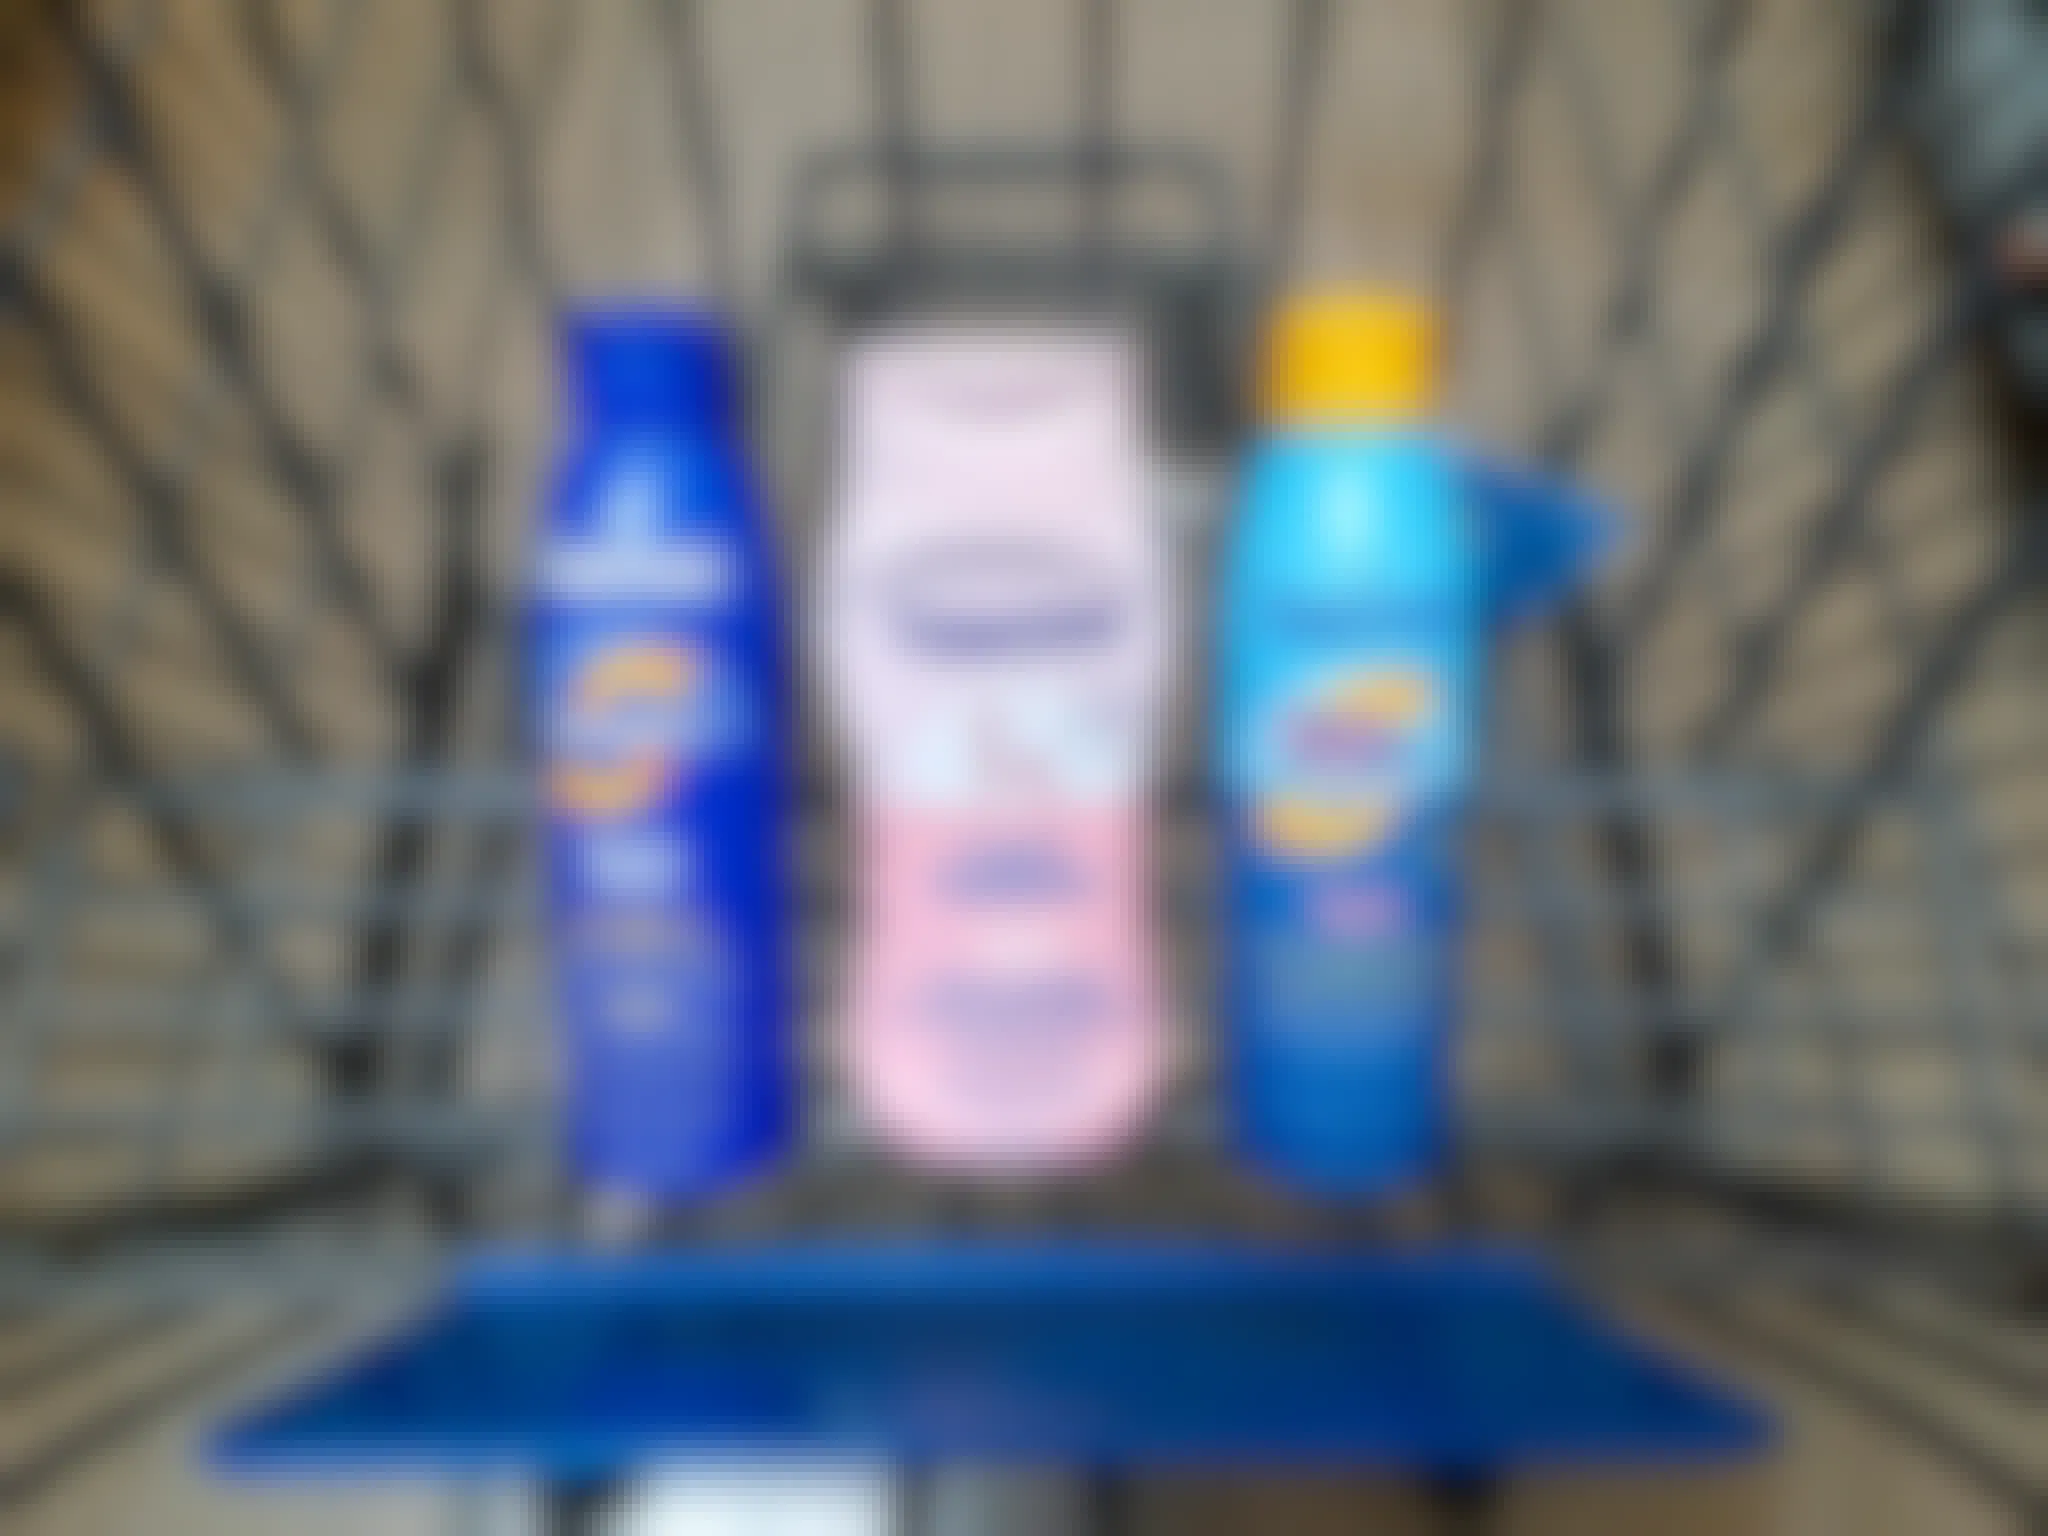 Three Coppertone Sunscreen products in Walmart shopping cart. Each product has a $2 hang tag coupon attached.